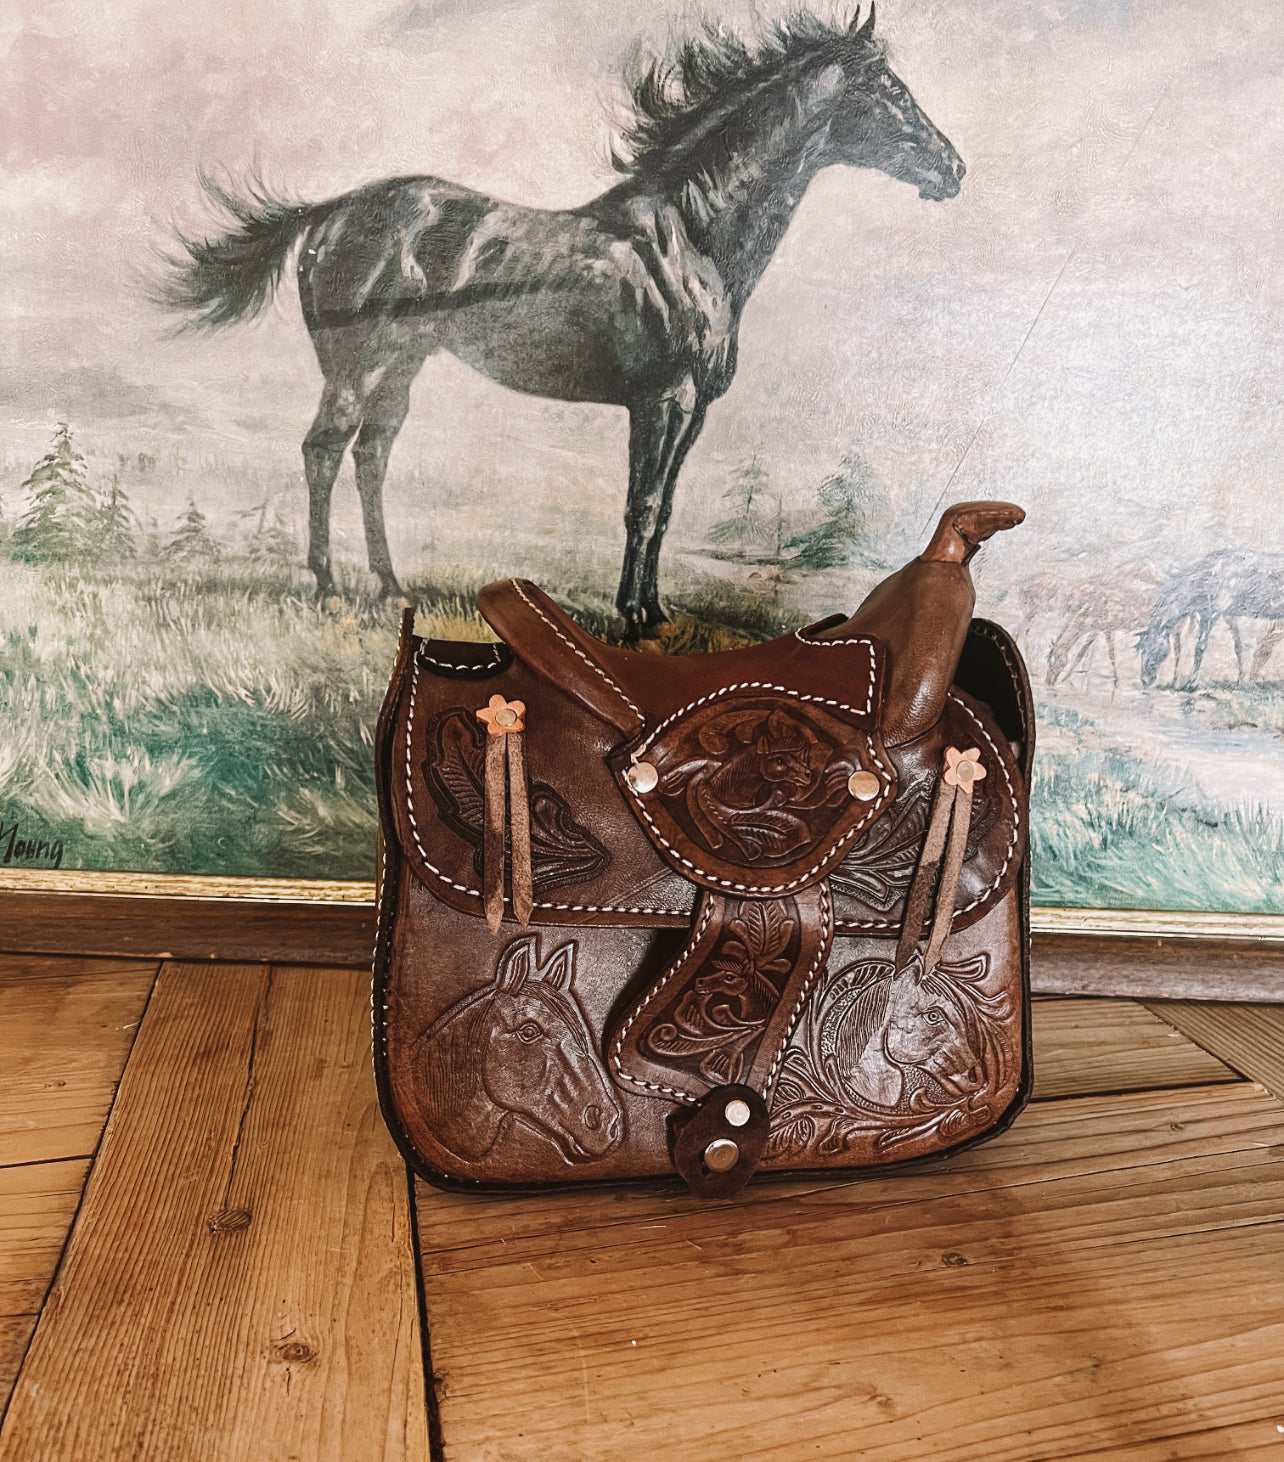 Small Saddle Bag Mexican Tooled Leather Acapulco Vintage Souvenir Purse for  Girl Boho Hippie Style